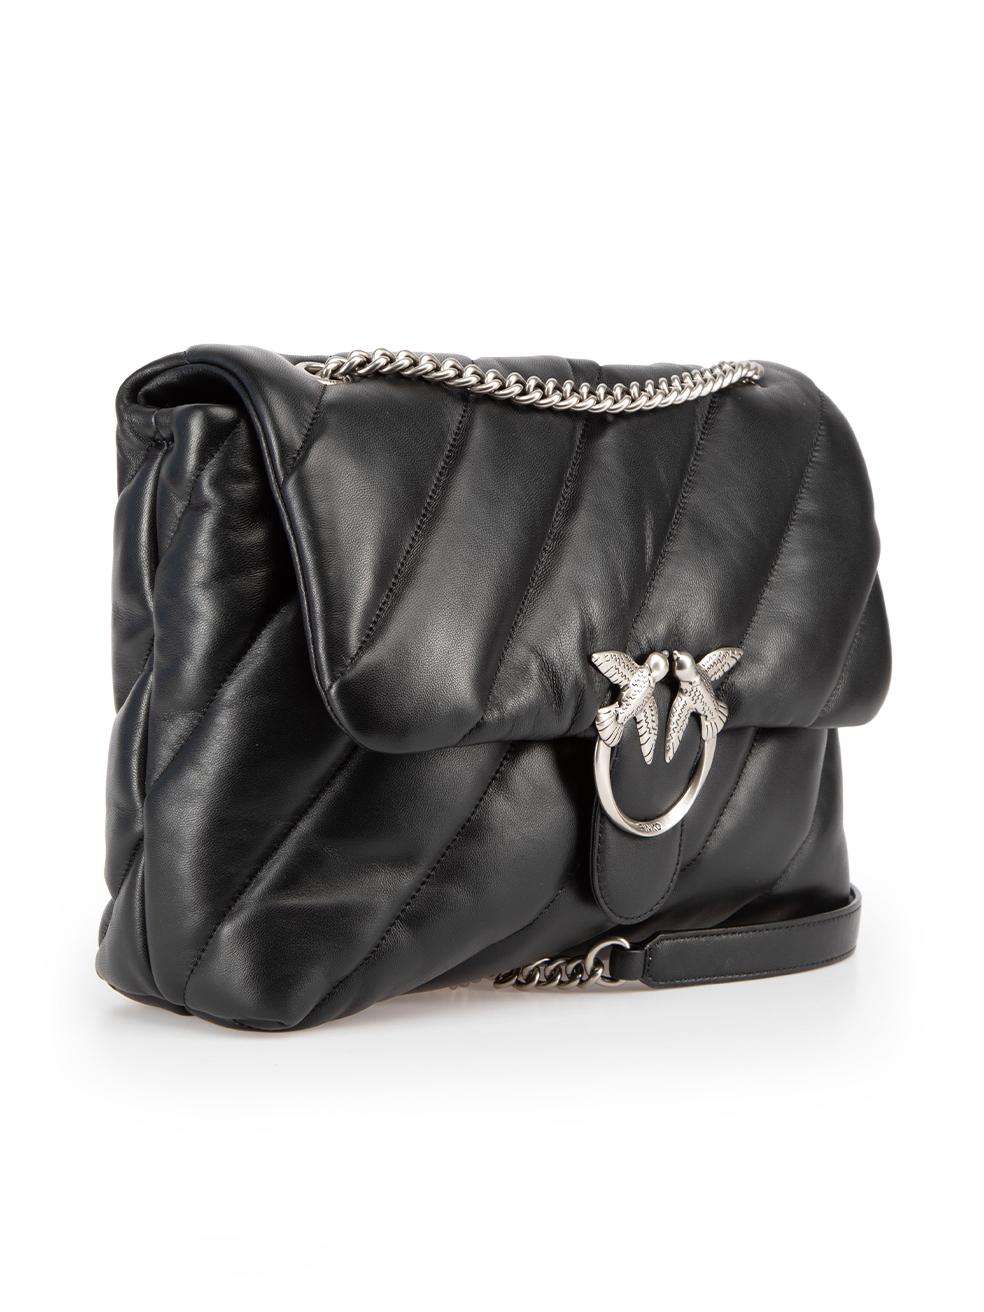 CONDITION is New with tags on this brand new Pinko designer item. This item comes with original packaging.
 
 
 
 Details
 
 
 Love Big Puff
 
 Black
 
 Leather
 
 Medium crossbody bag
 
 Quilted
 
 Silver tone hardware
 
 Lovebirds logo detail
 
